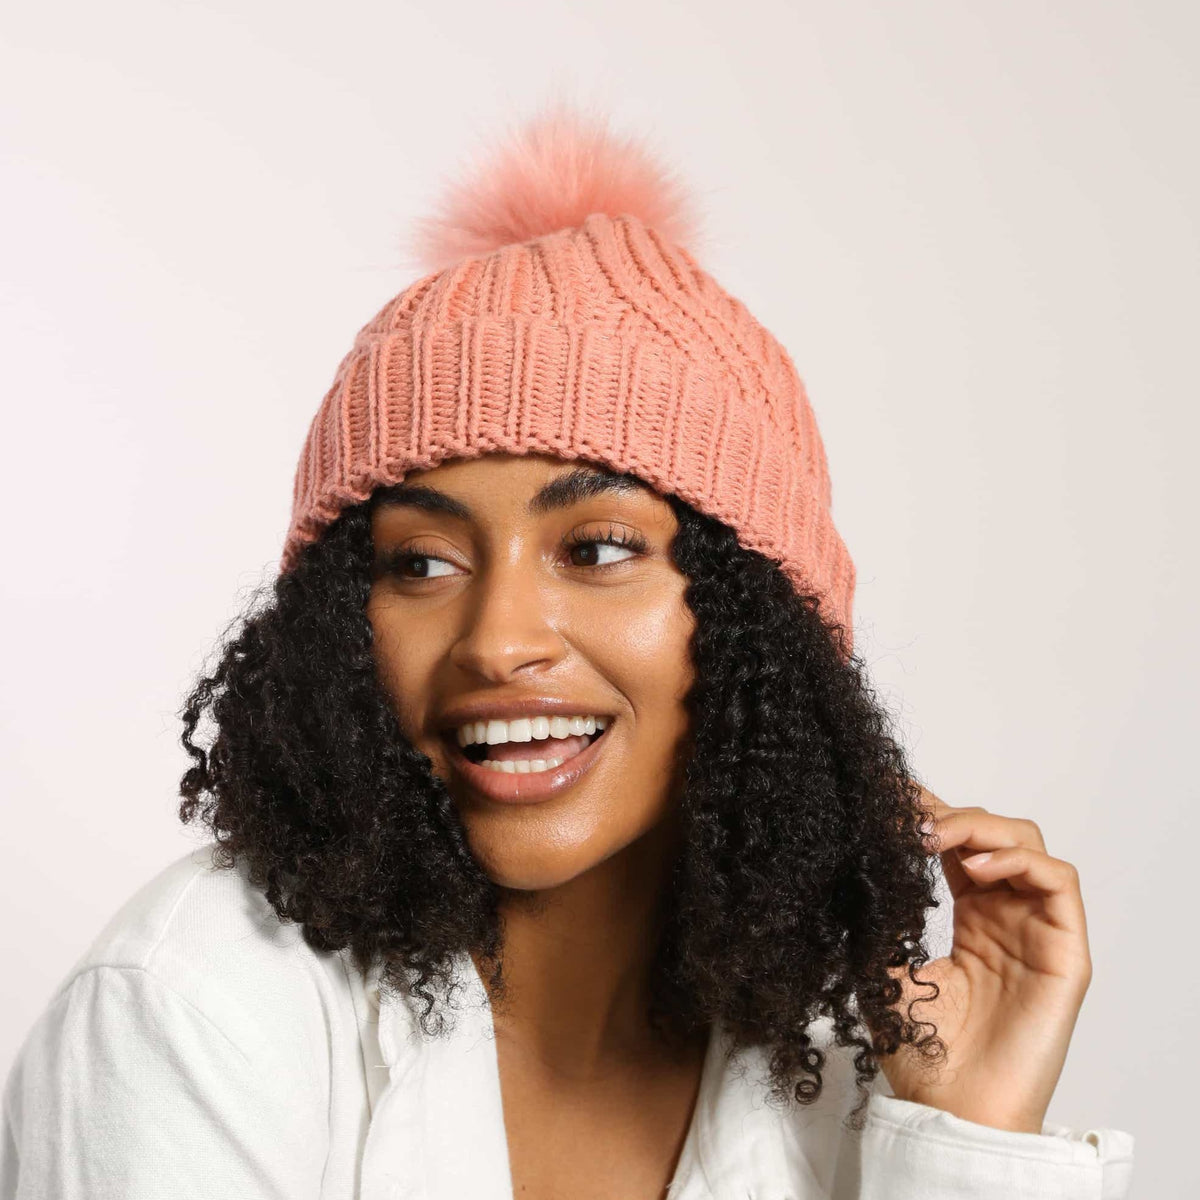 Only Curls Satin Lined Knitted Beanie Hat - Dusty Coral with Pom Pom - Only Curls